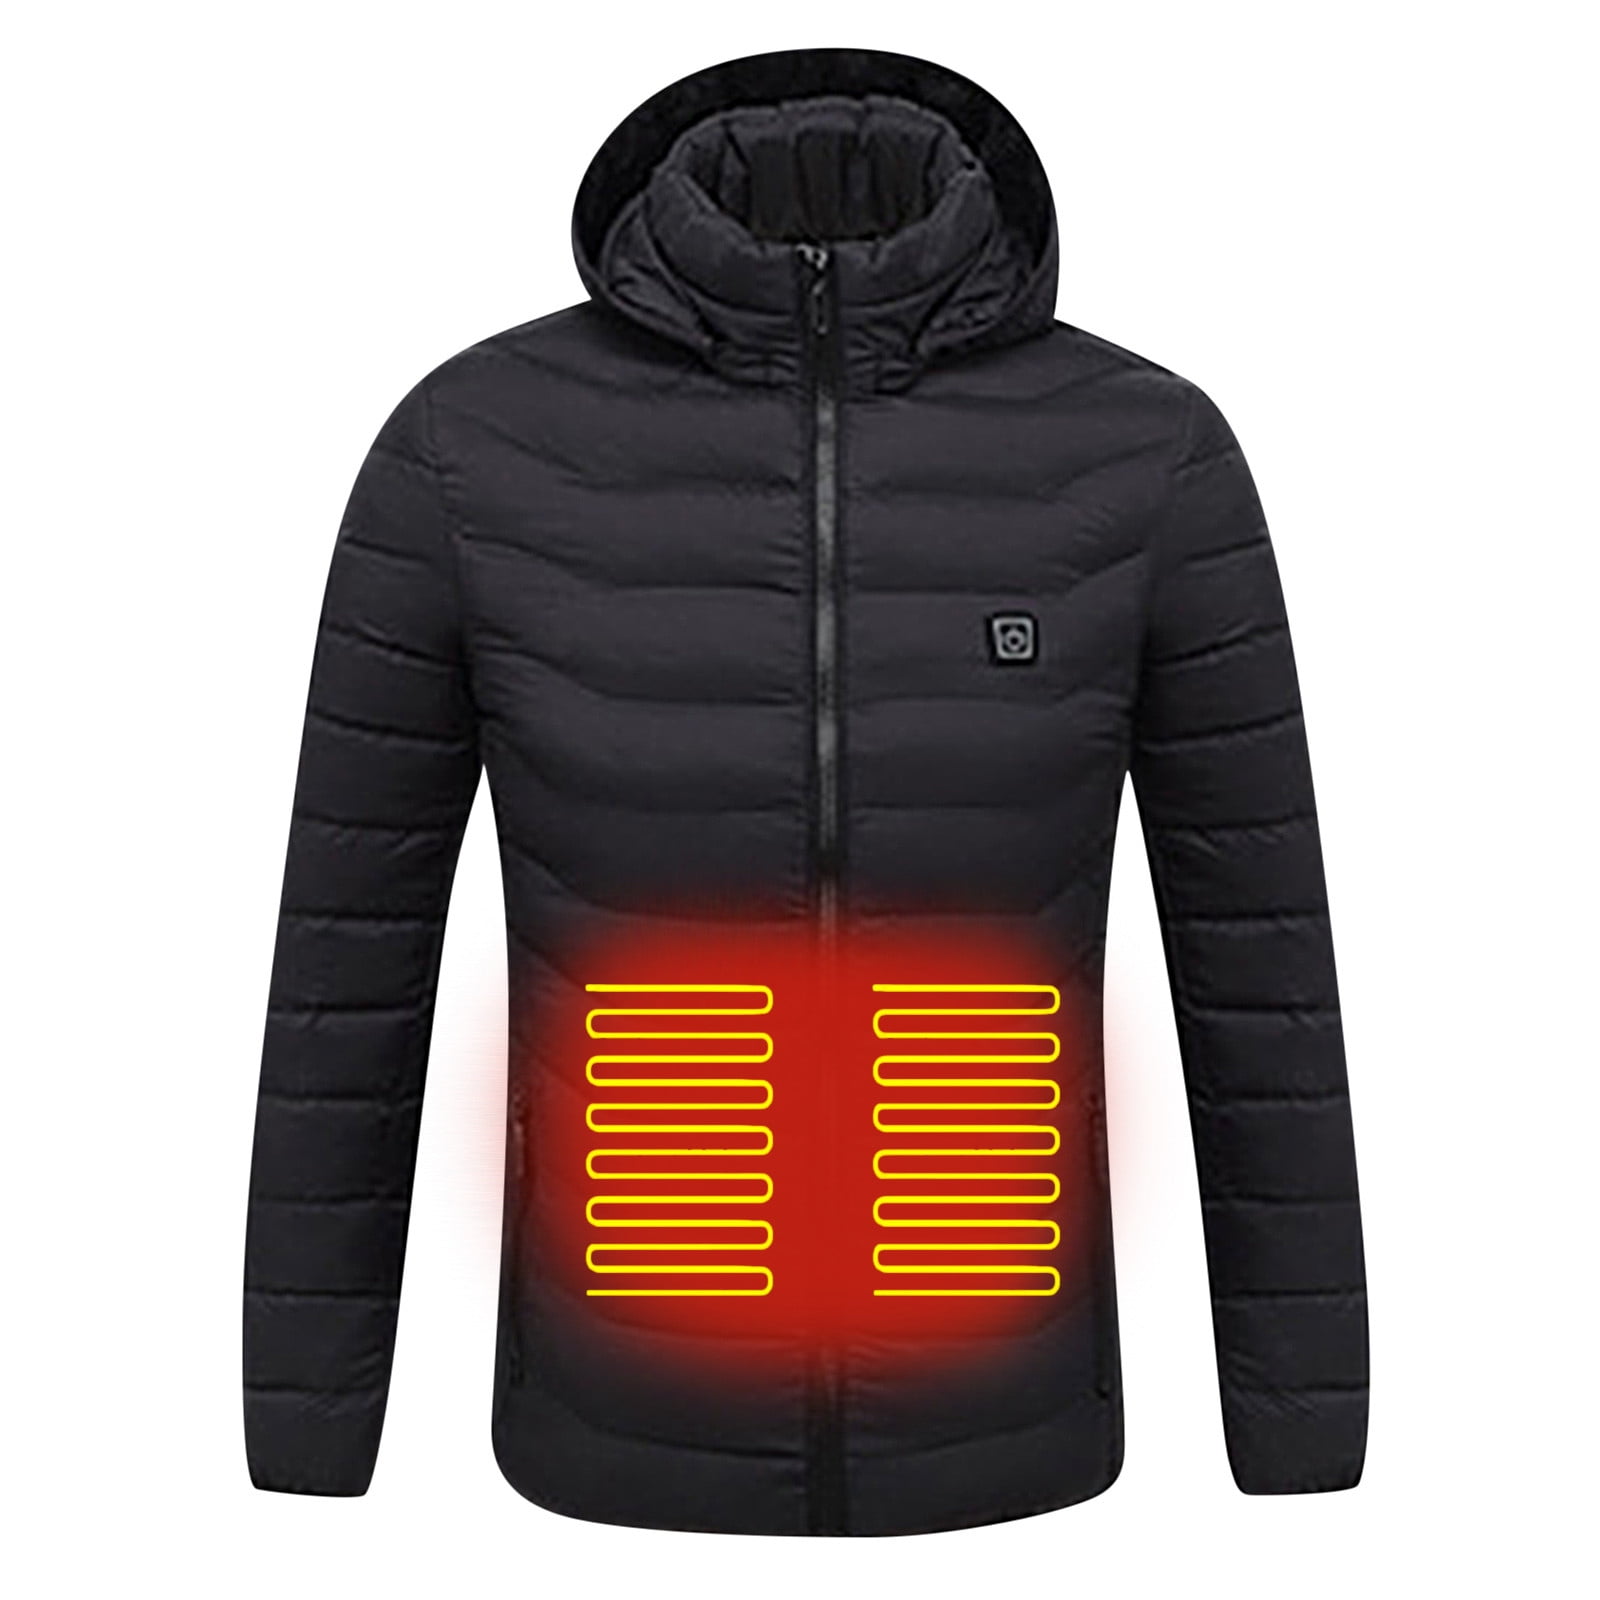 vbnergoie Heated Outdoor Clothing For Riding Skiing Fishing Via